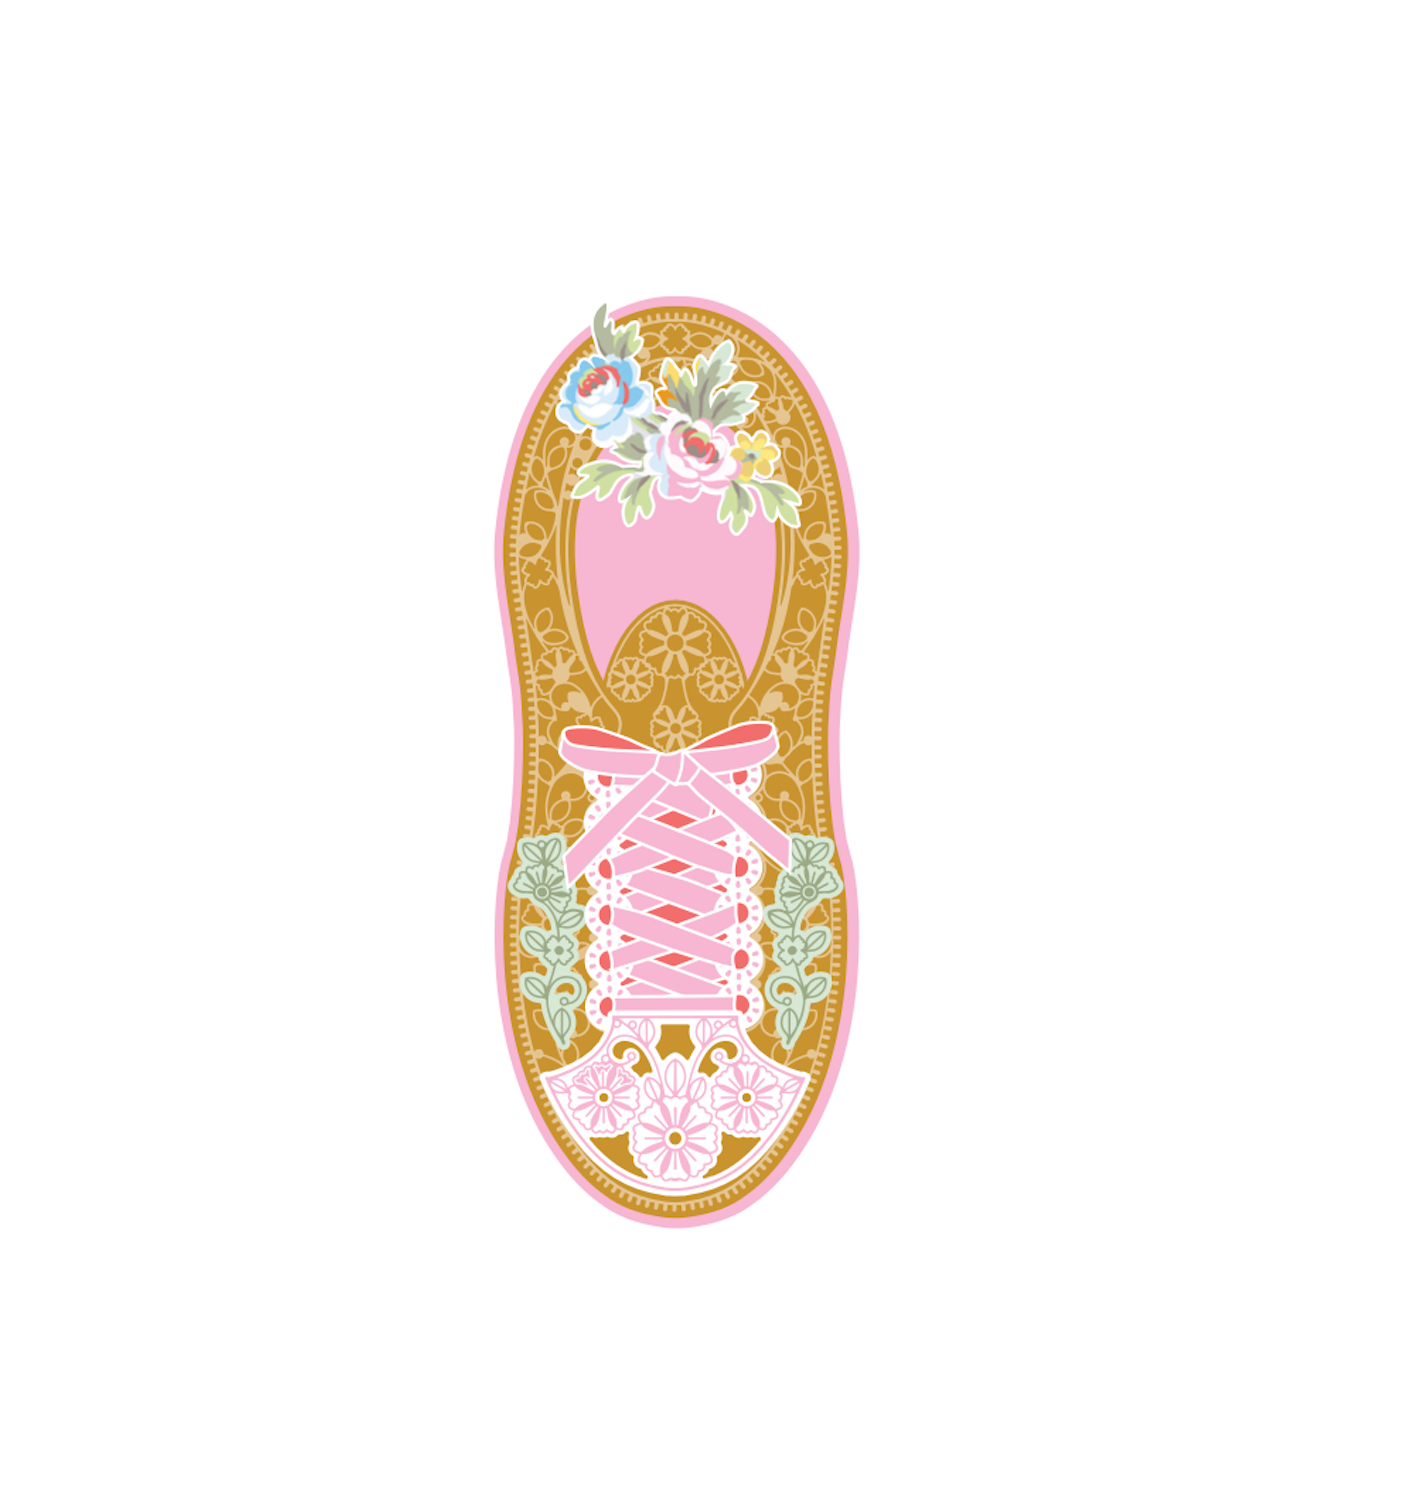 Illustration of a decorative sandal with floral and geometric patterns, featuring the Members Only Badge April 2024 heat transfer patches.